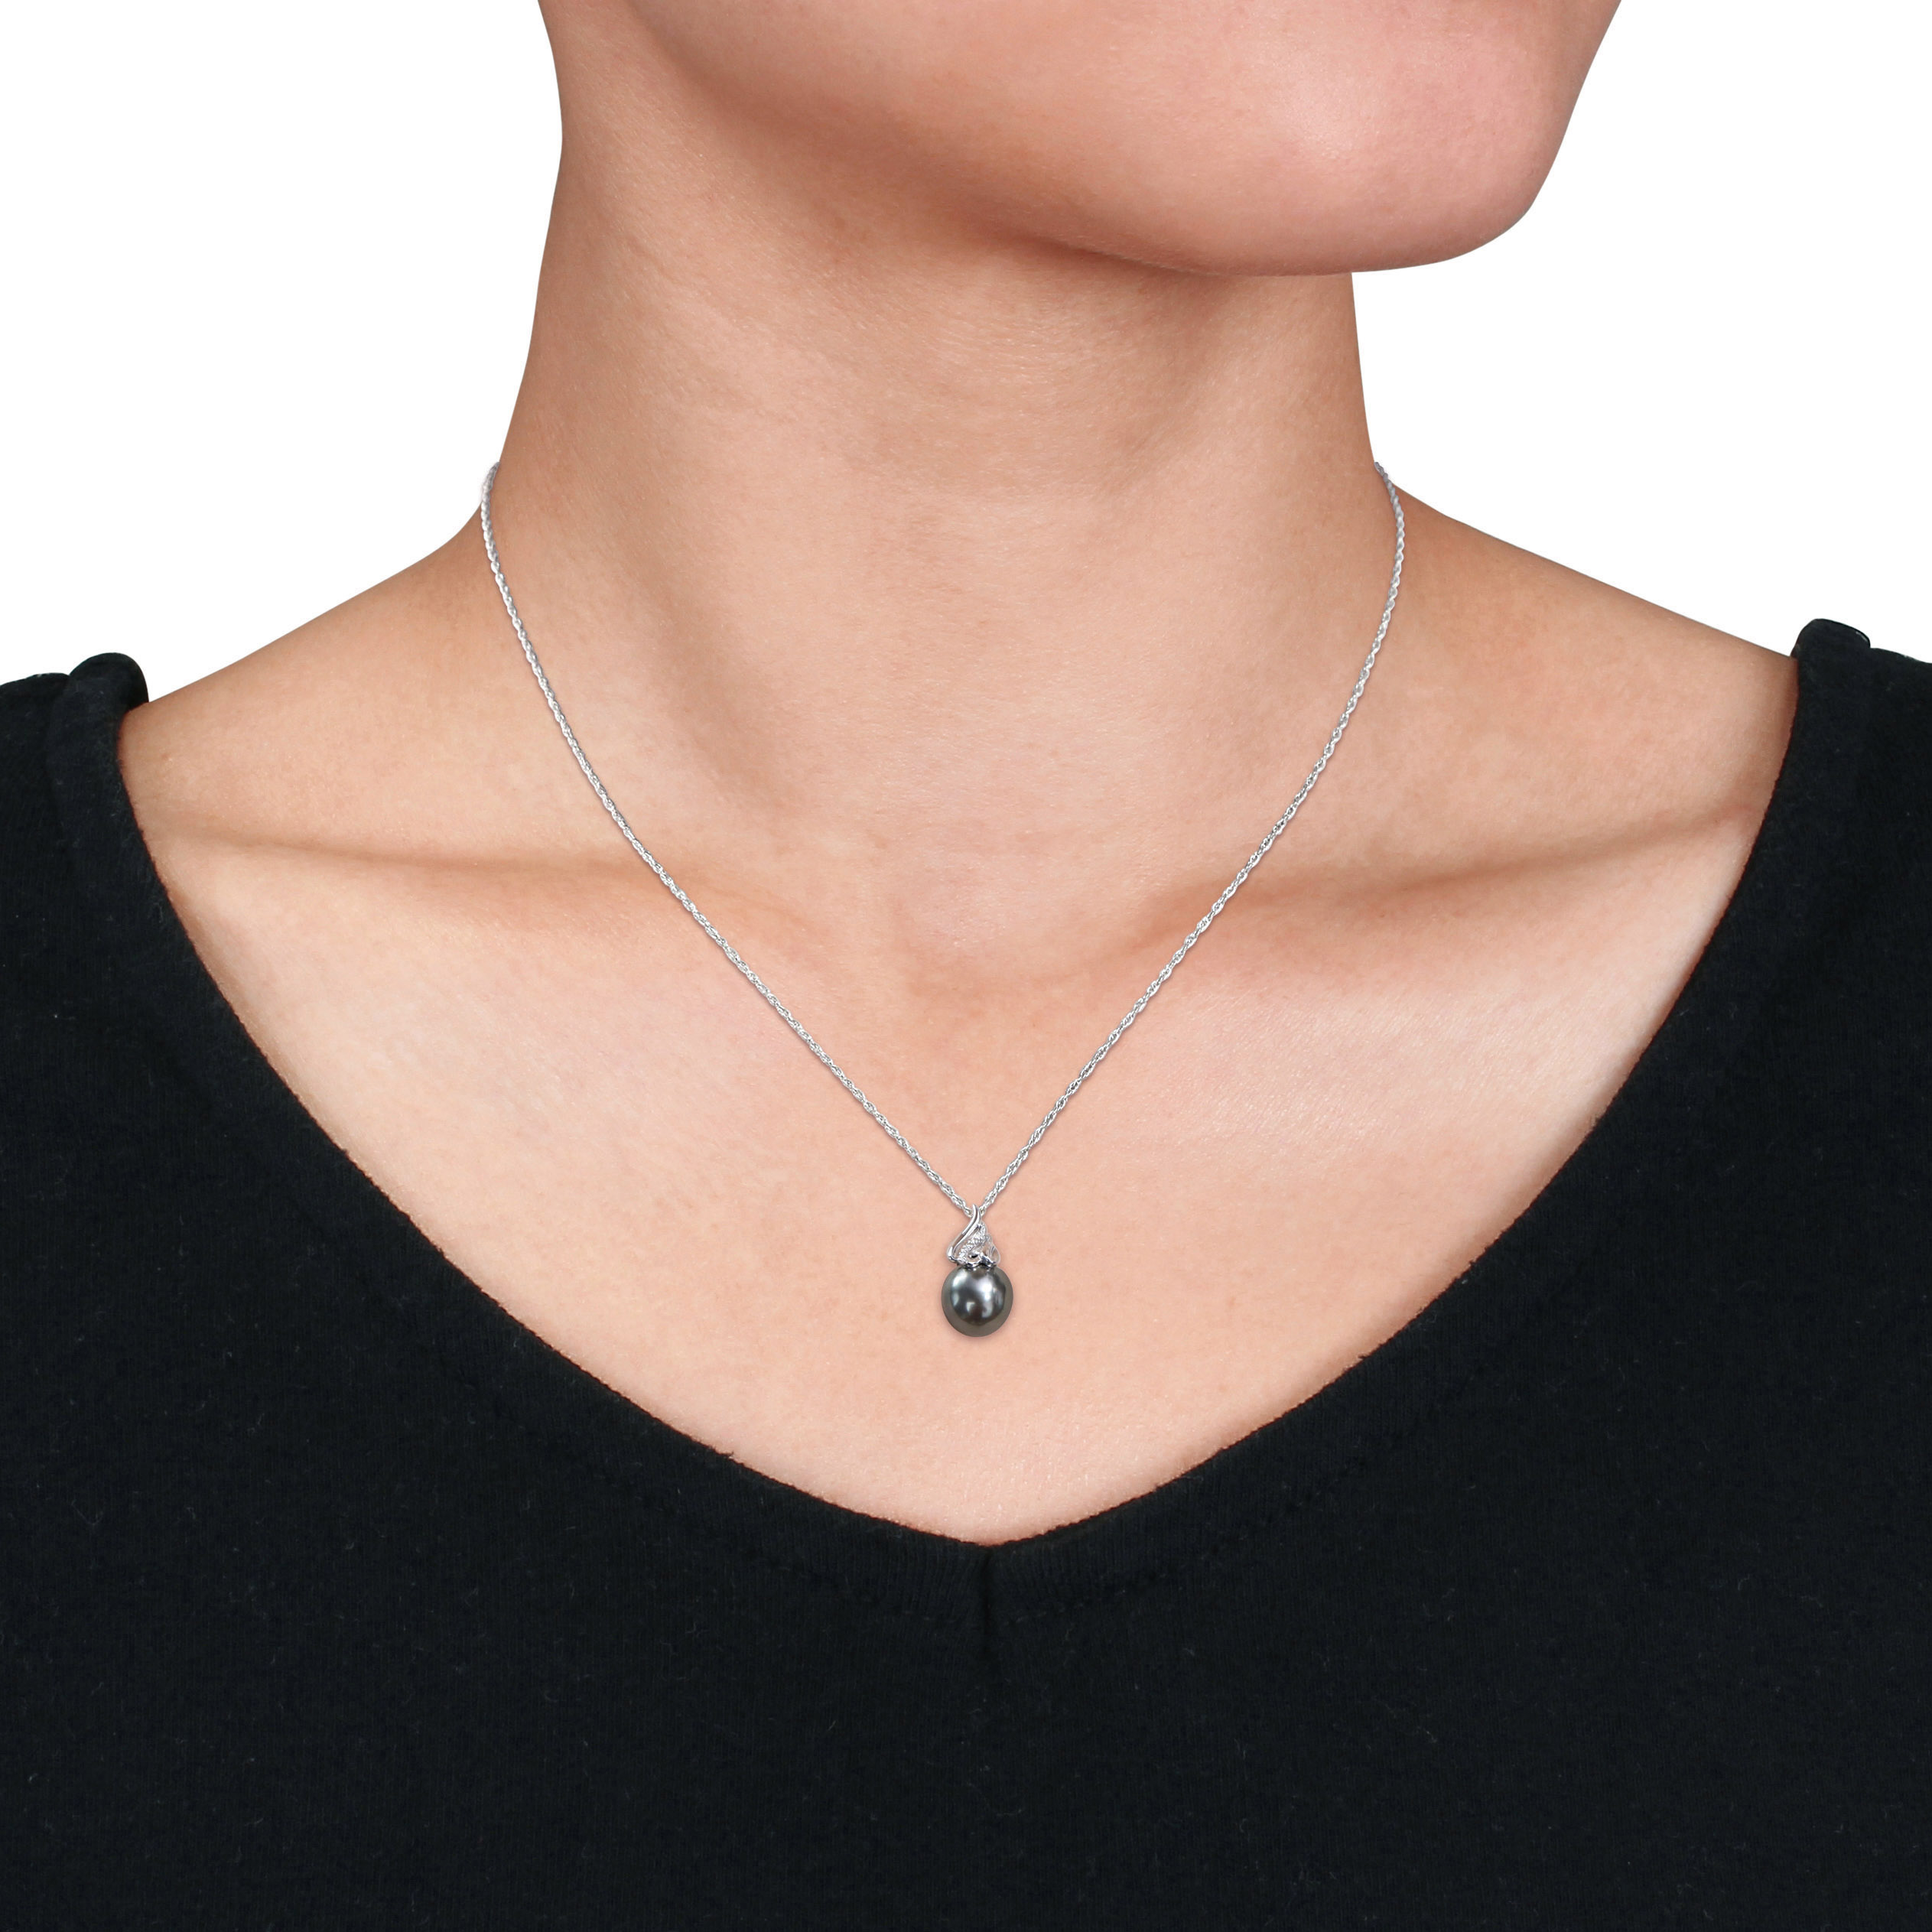 9-10 MM Black Tahitian Cultured Pearl & Diamond Accent Swirl Pendant with Chain in 14k White Gold - 17 in.